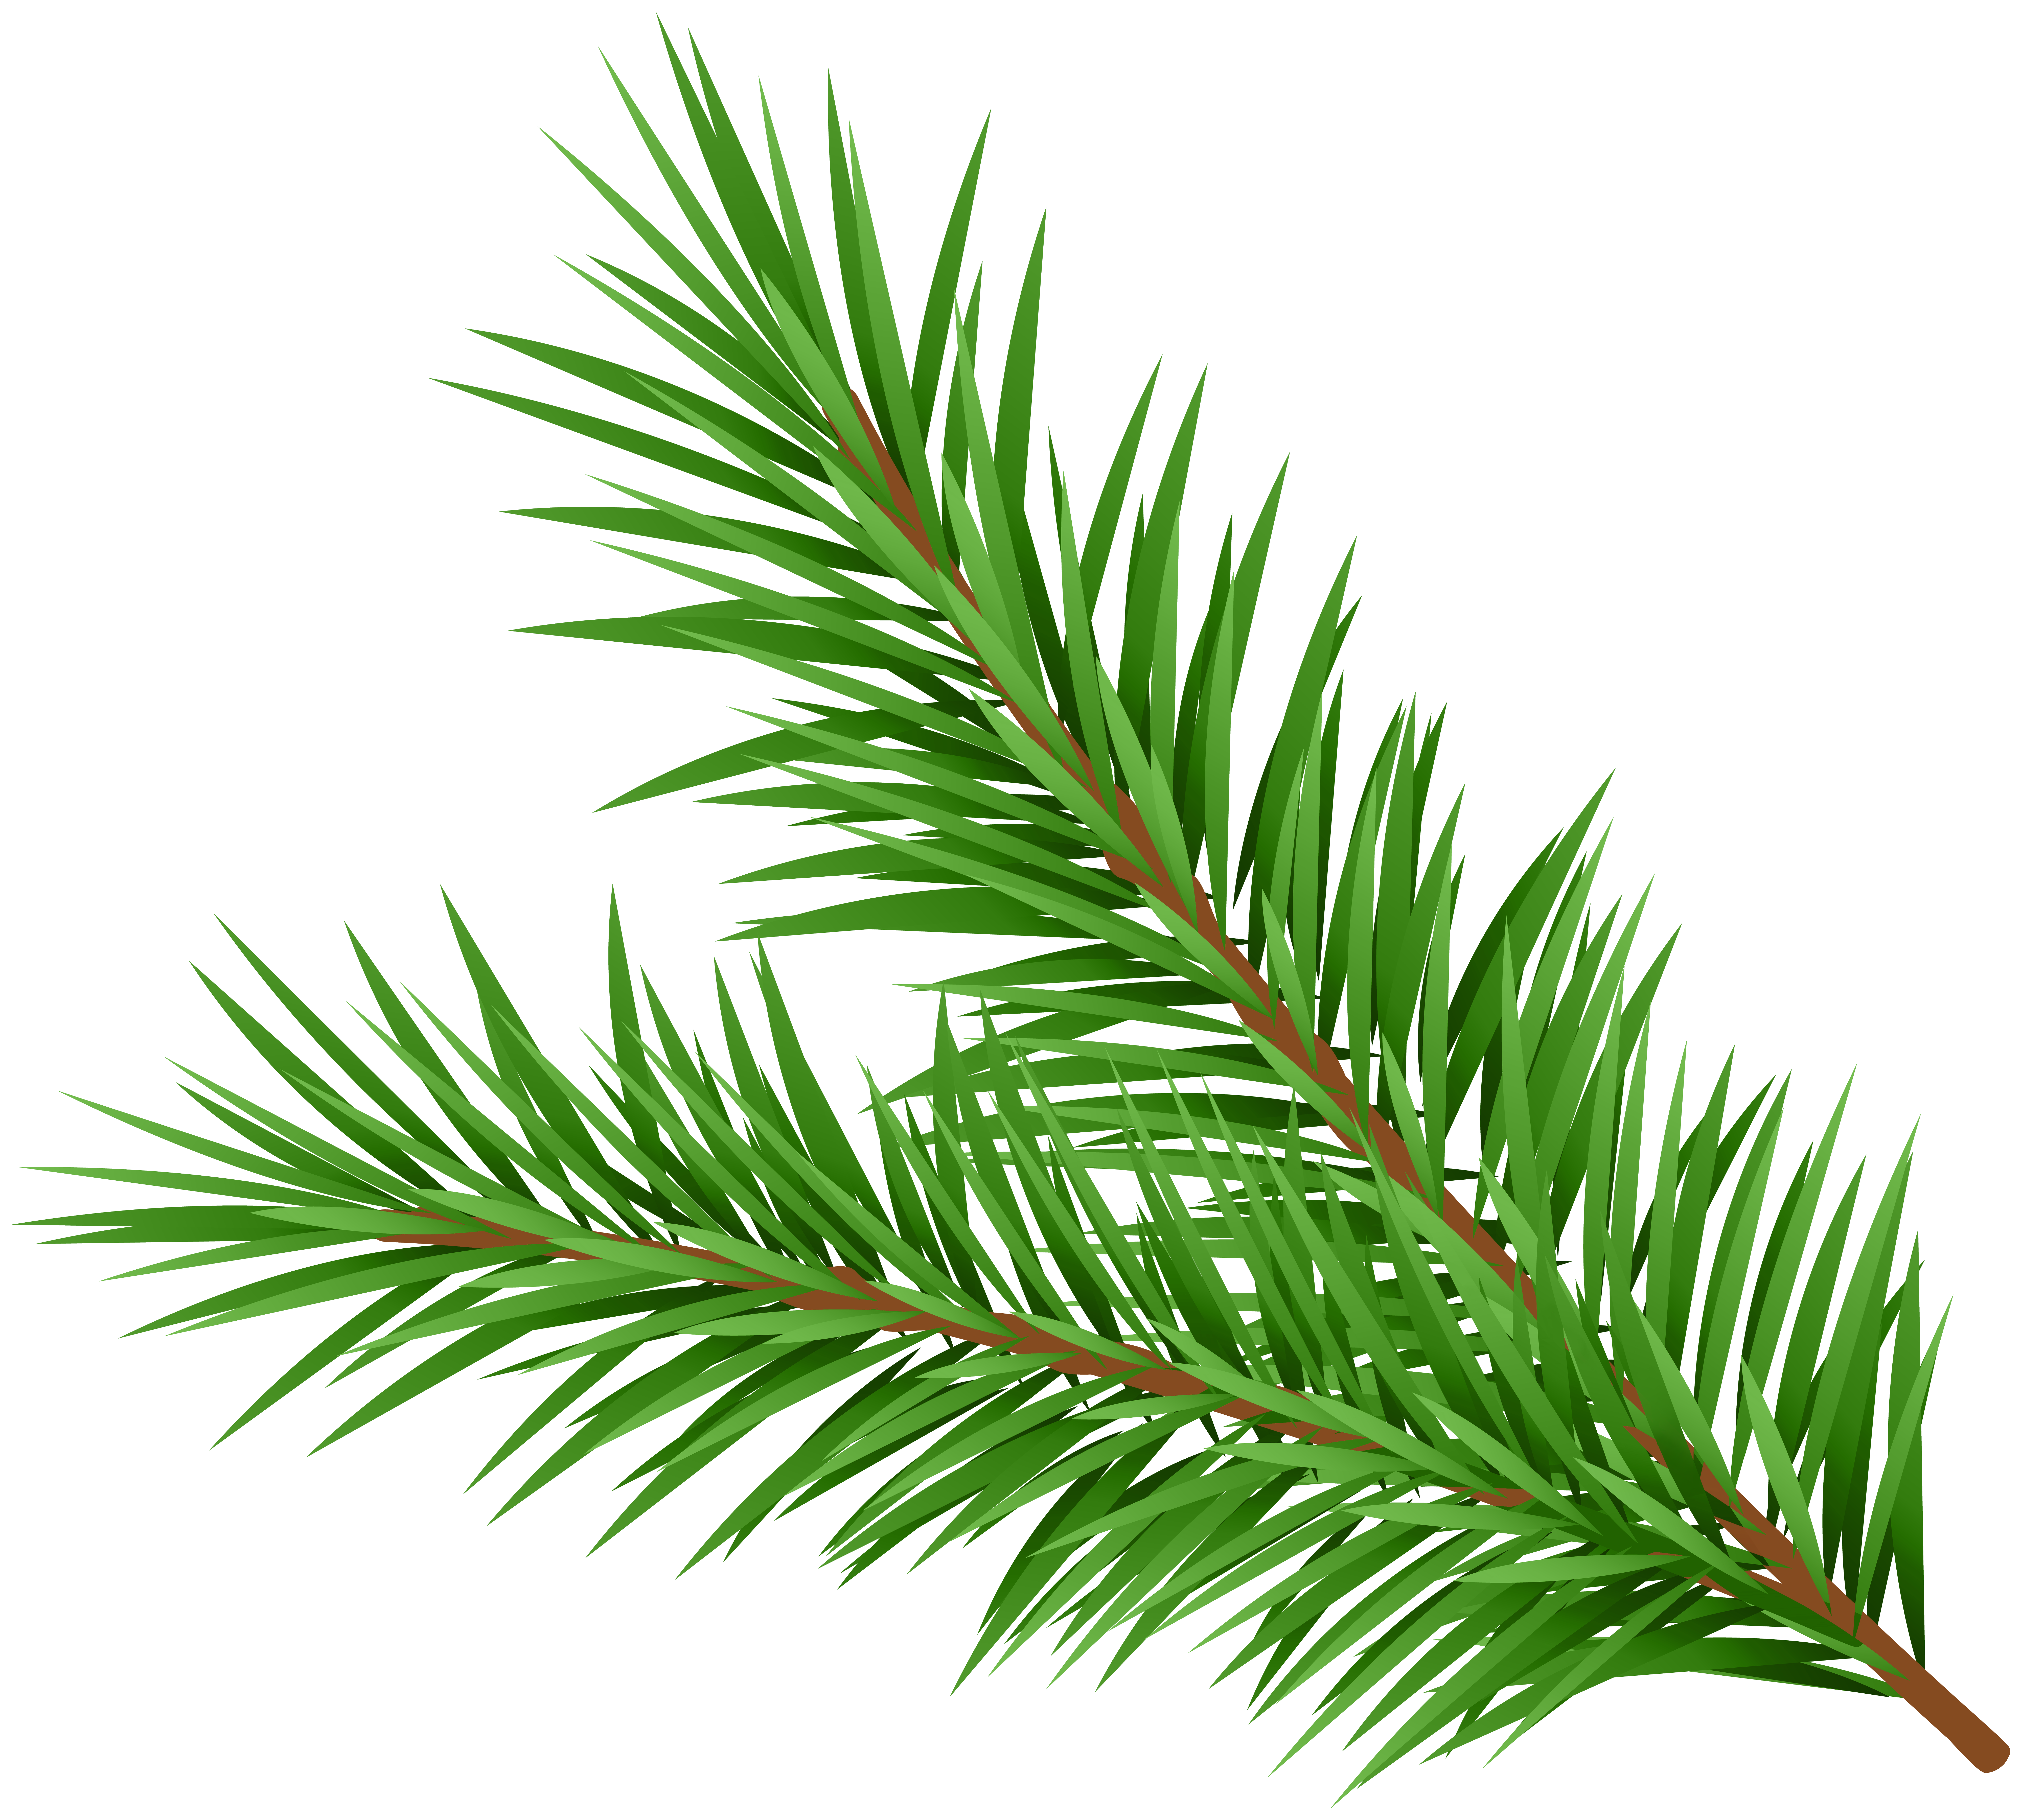 Red Christmas Ribbon with Pine Branches PNG Clipart Image​  Gallery  Yopriceville - High-Quality Free Images and Transparent PNG Clipart